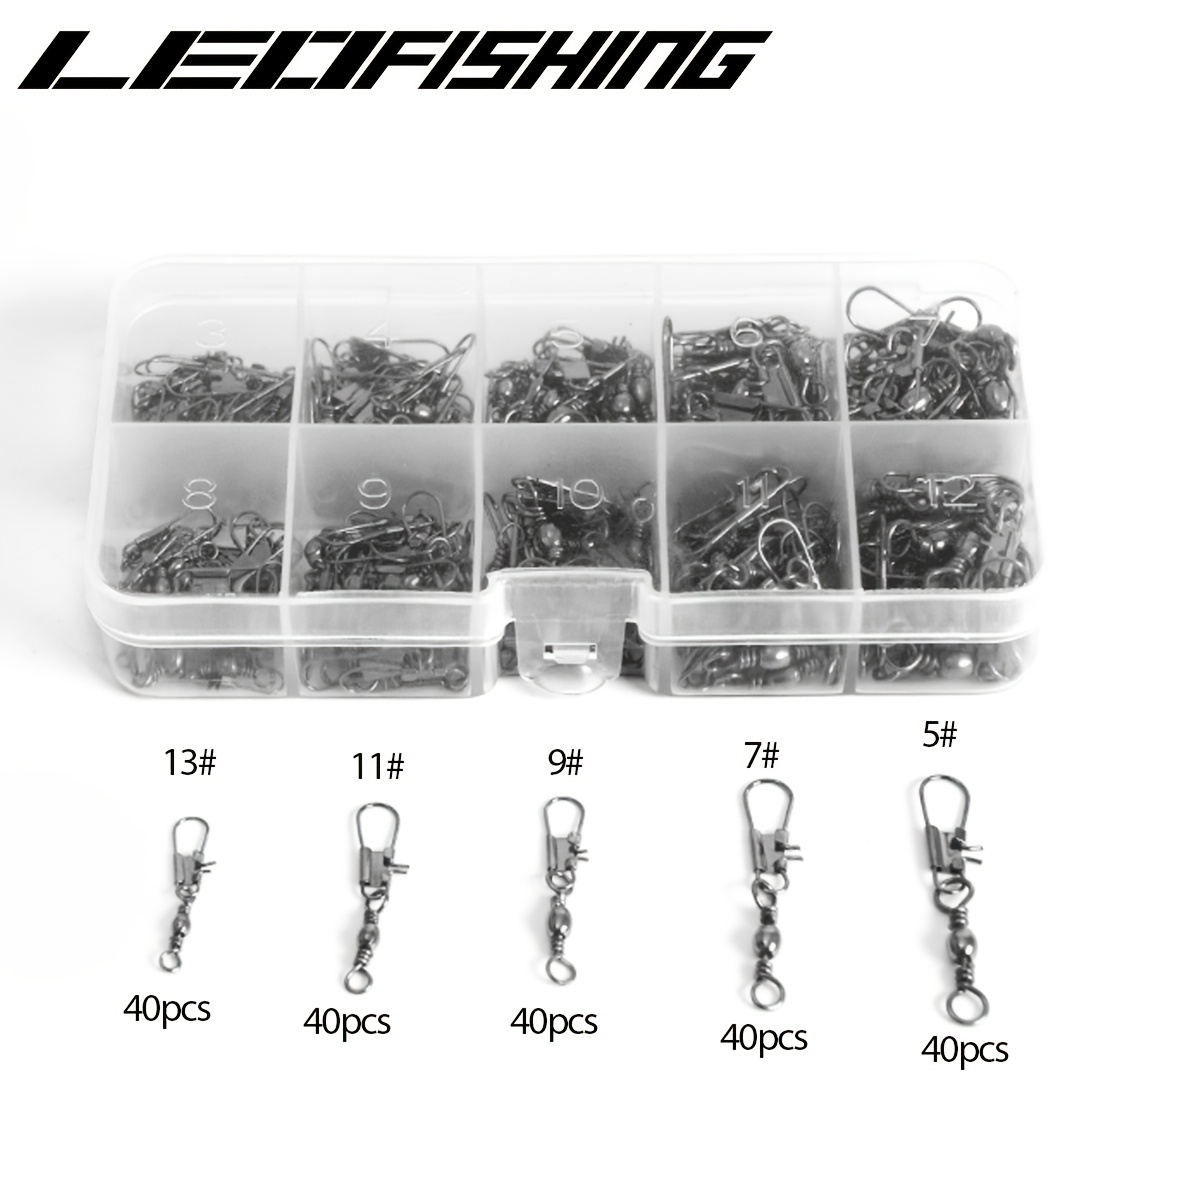 Fishing Accessories Lure Snap, Snap Fishing Tackle